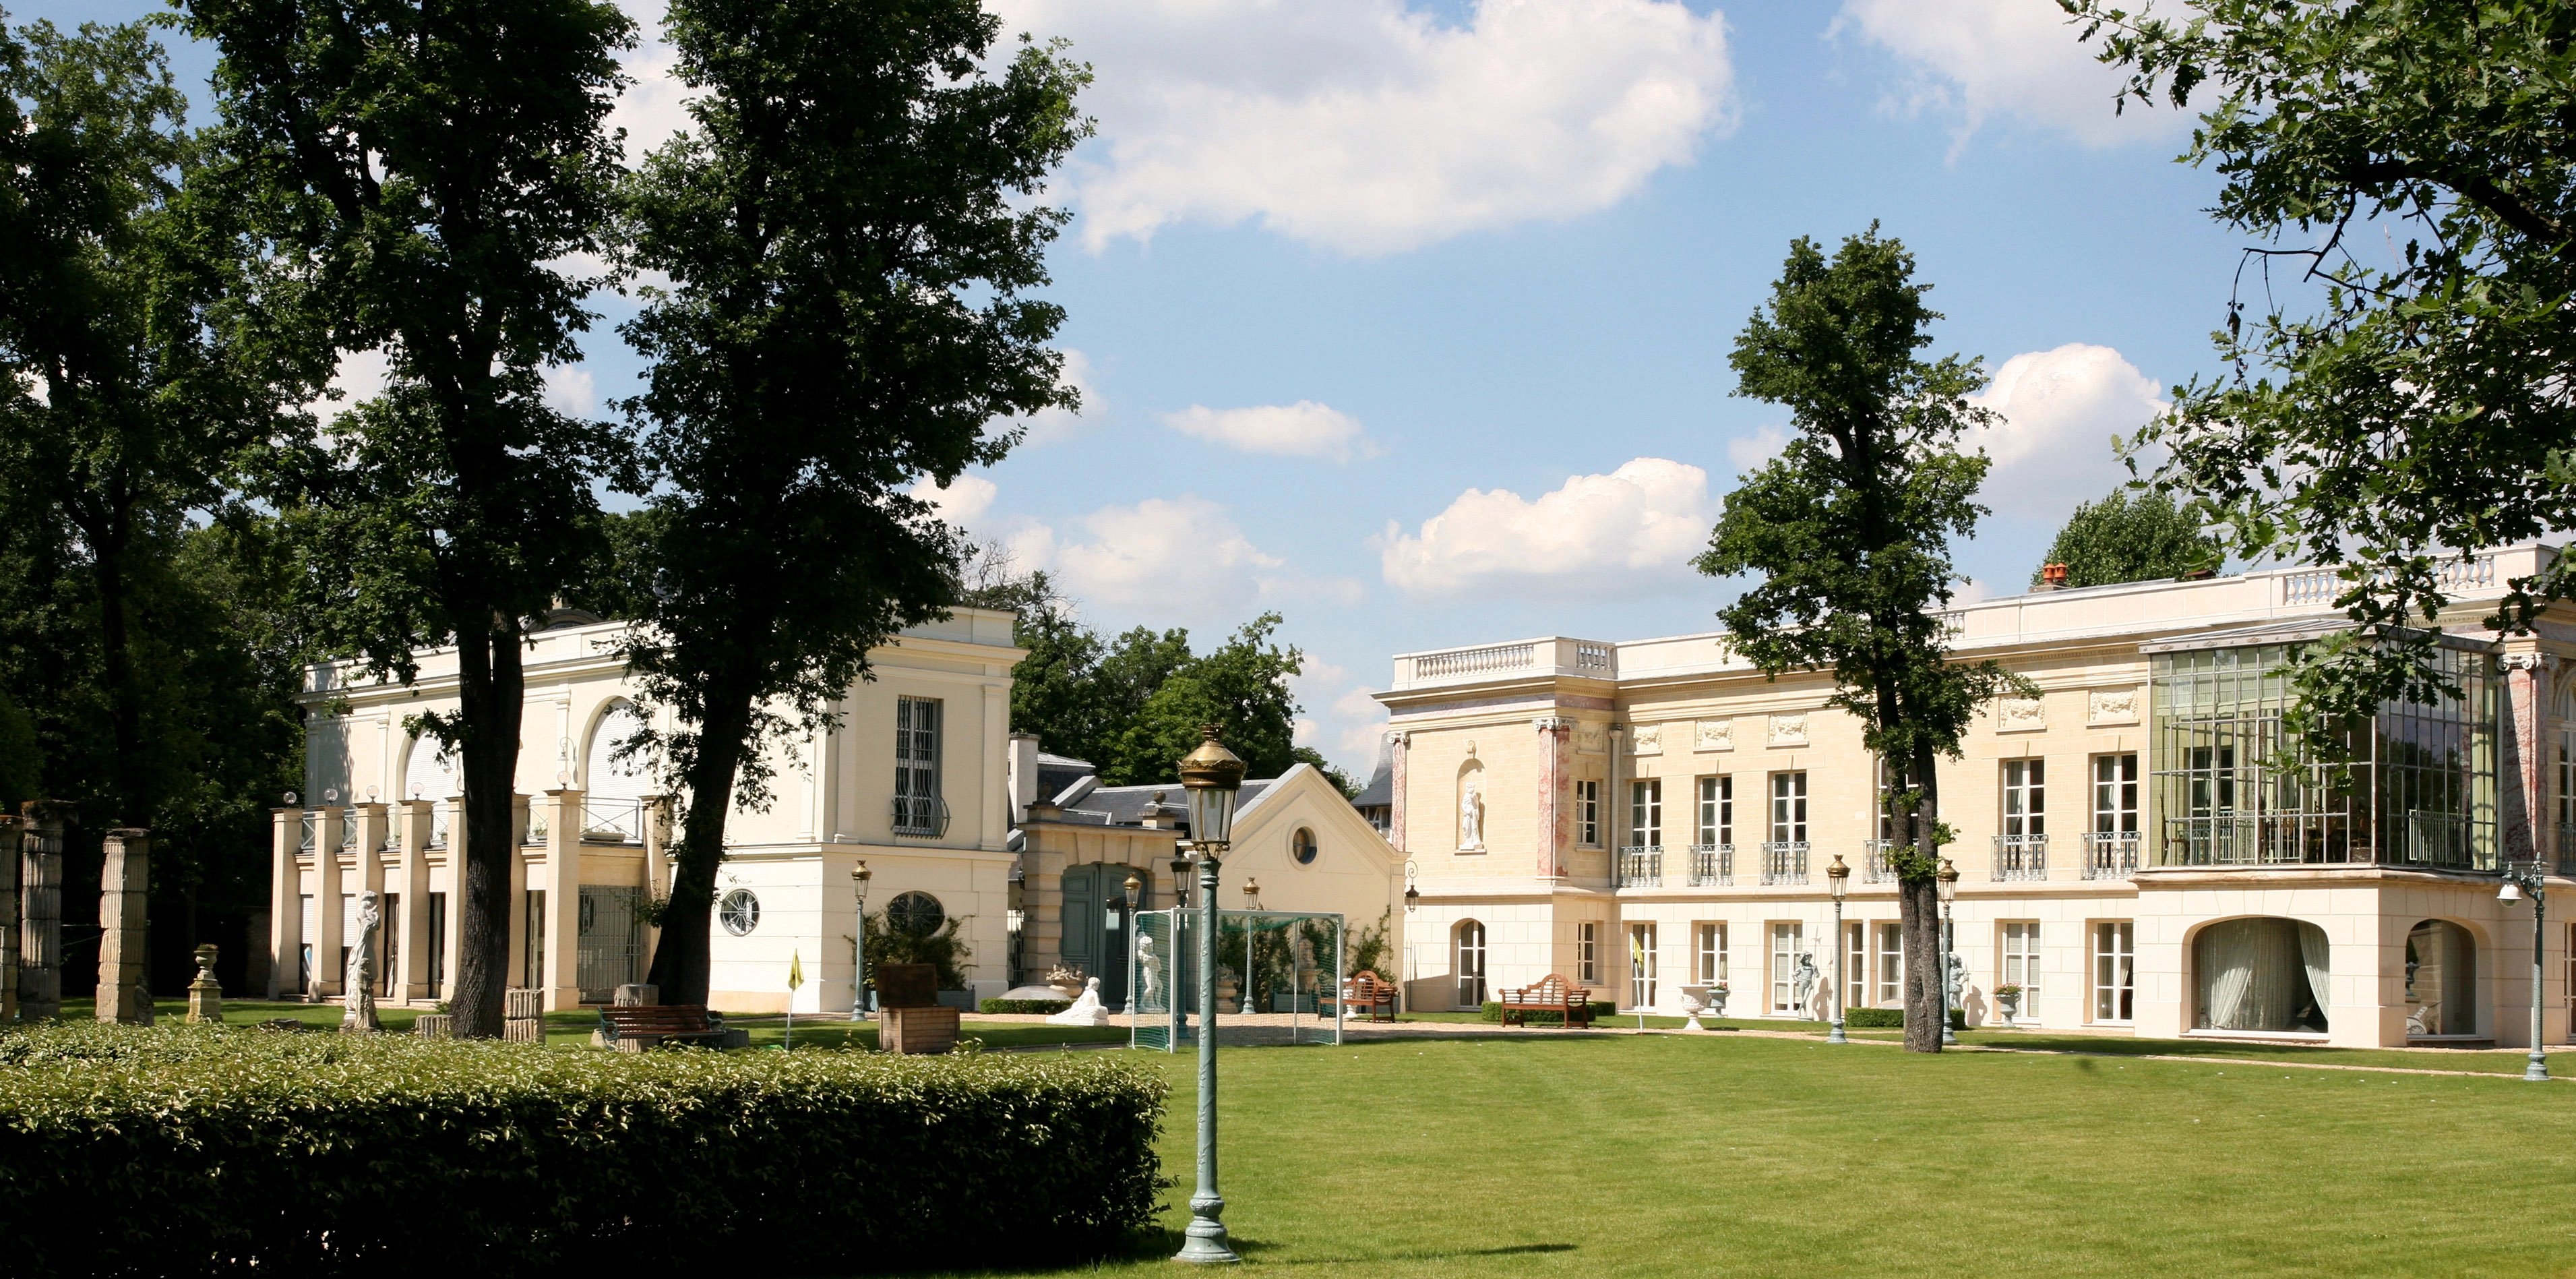 A sublime Palais inspired by Grand Trianon Palace, 20 min from Paris_1594